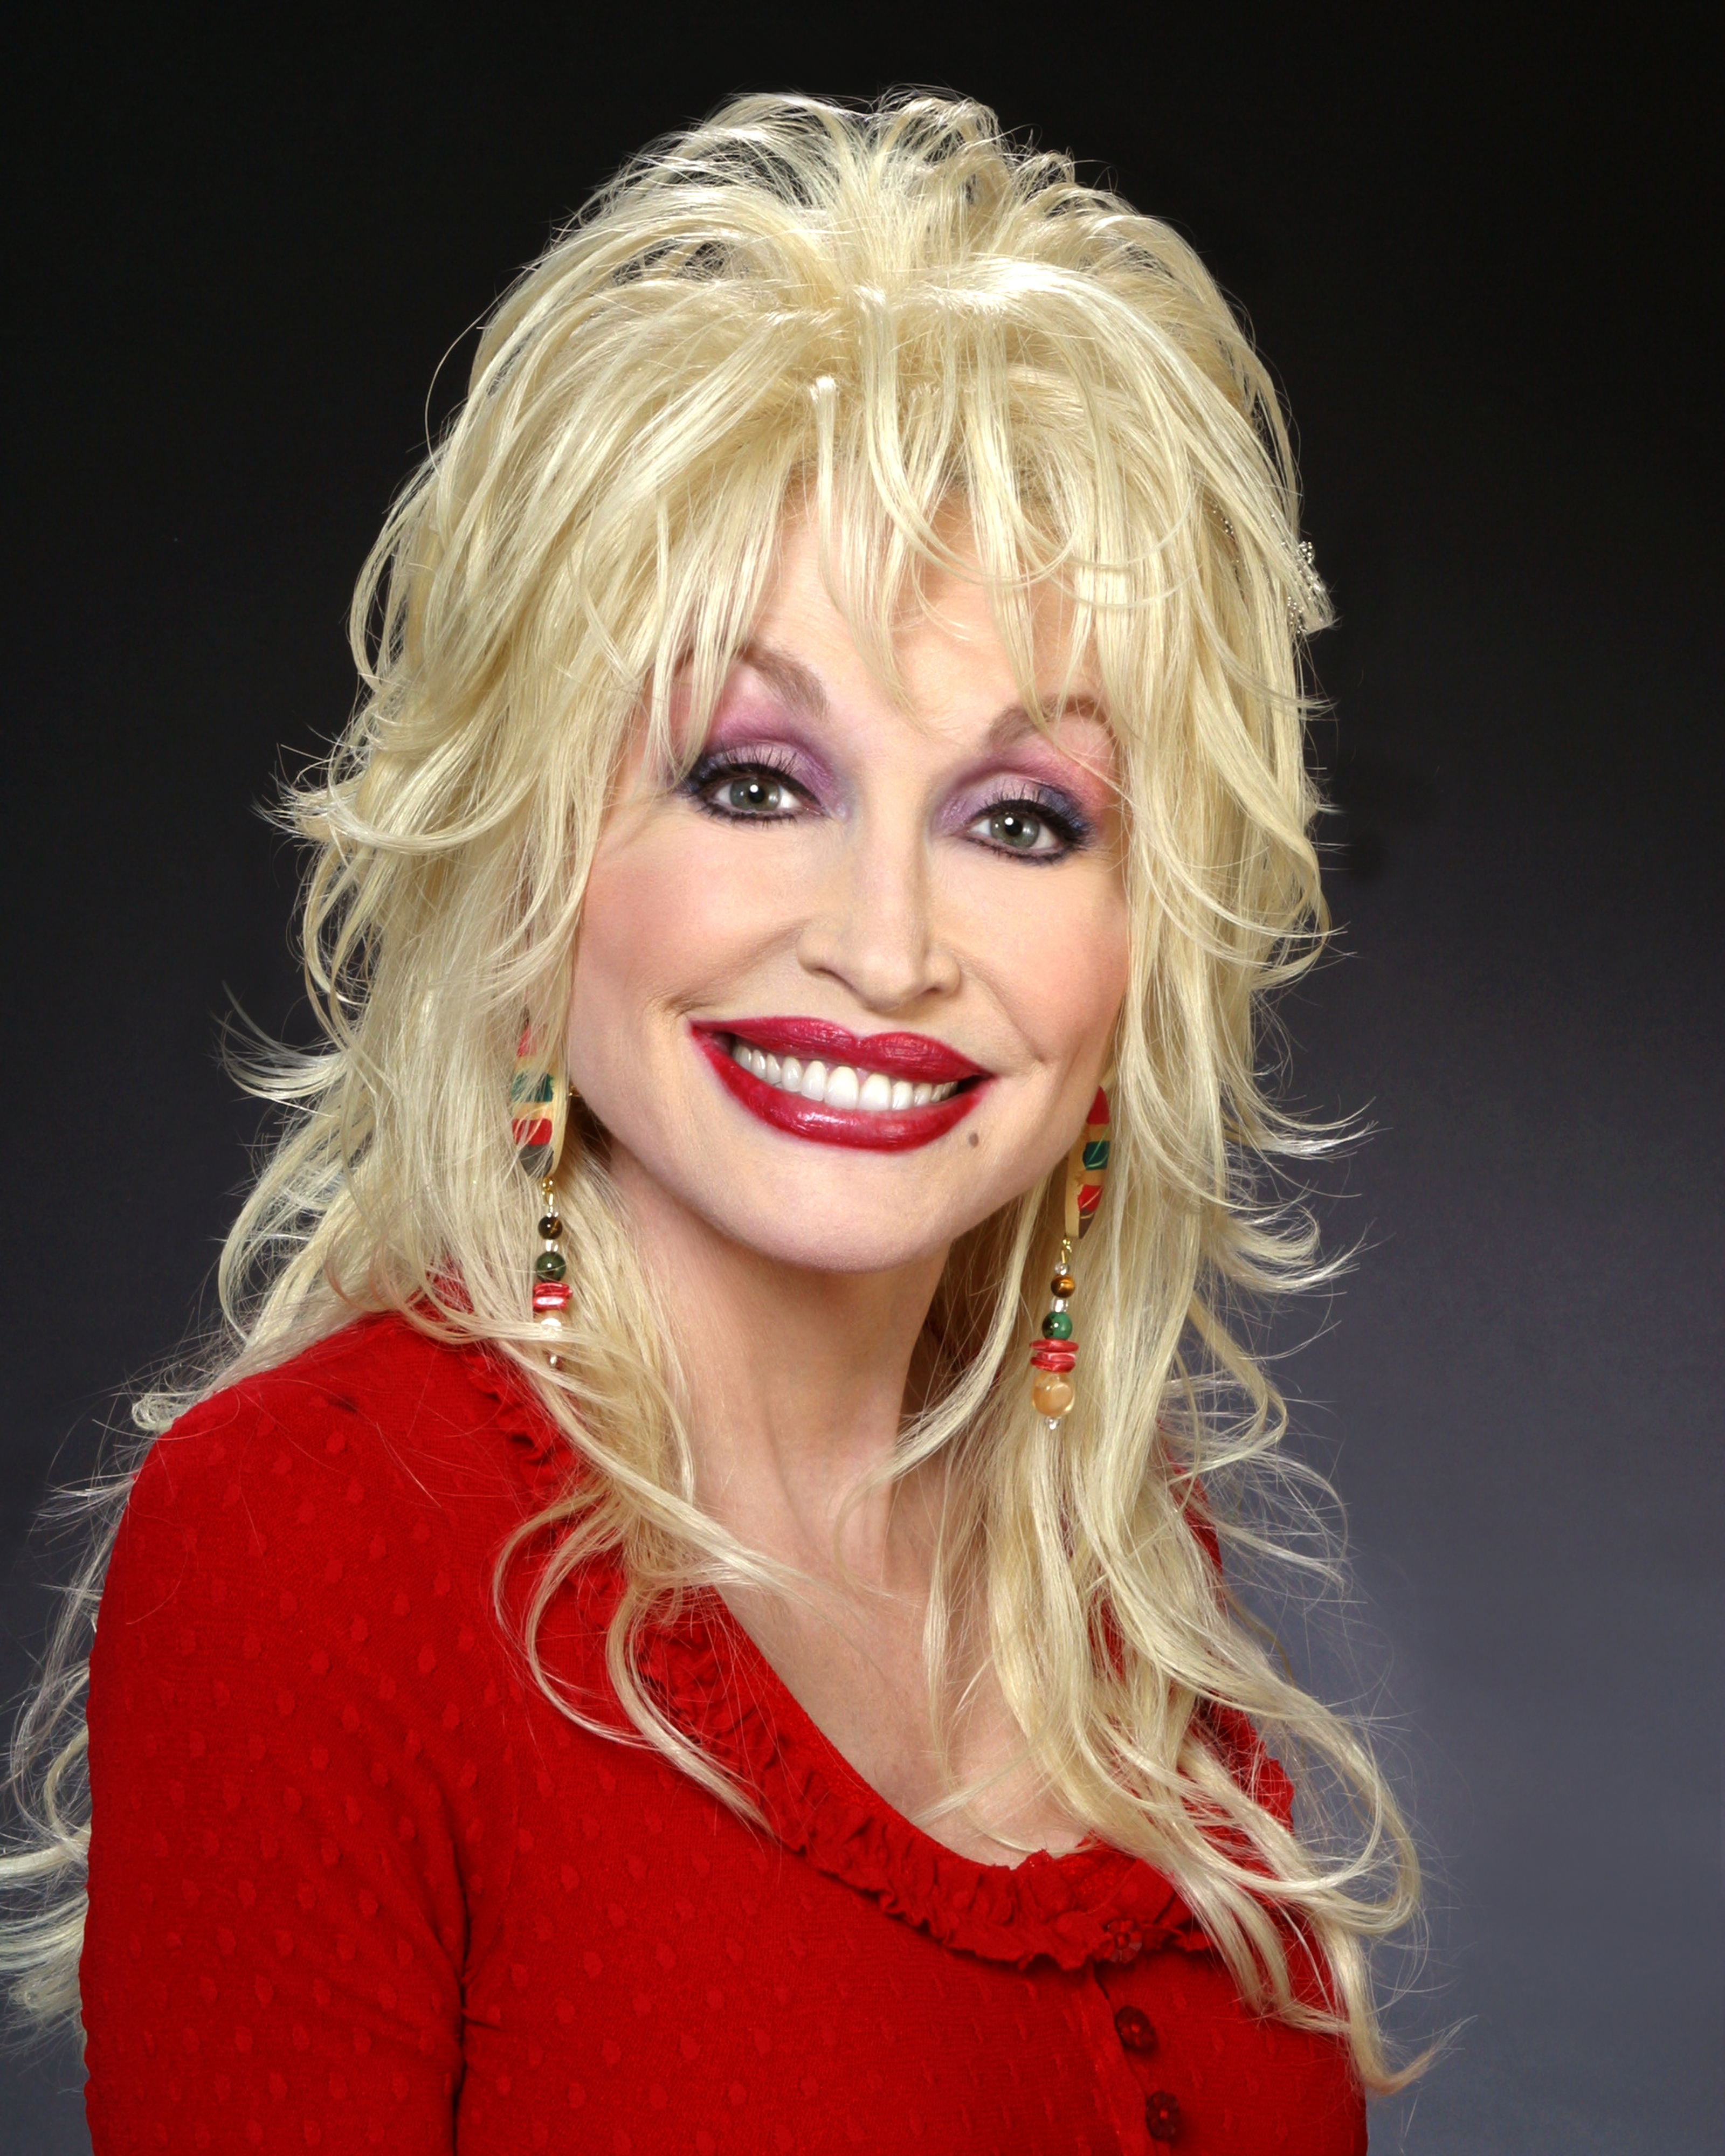 All 94+ Images recent photos of dolly parton Stunning